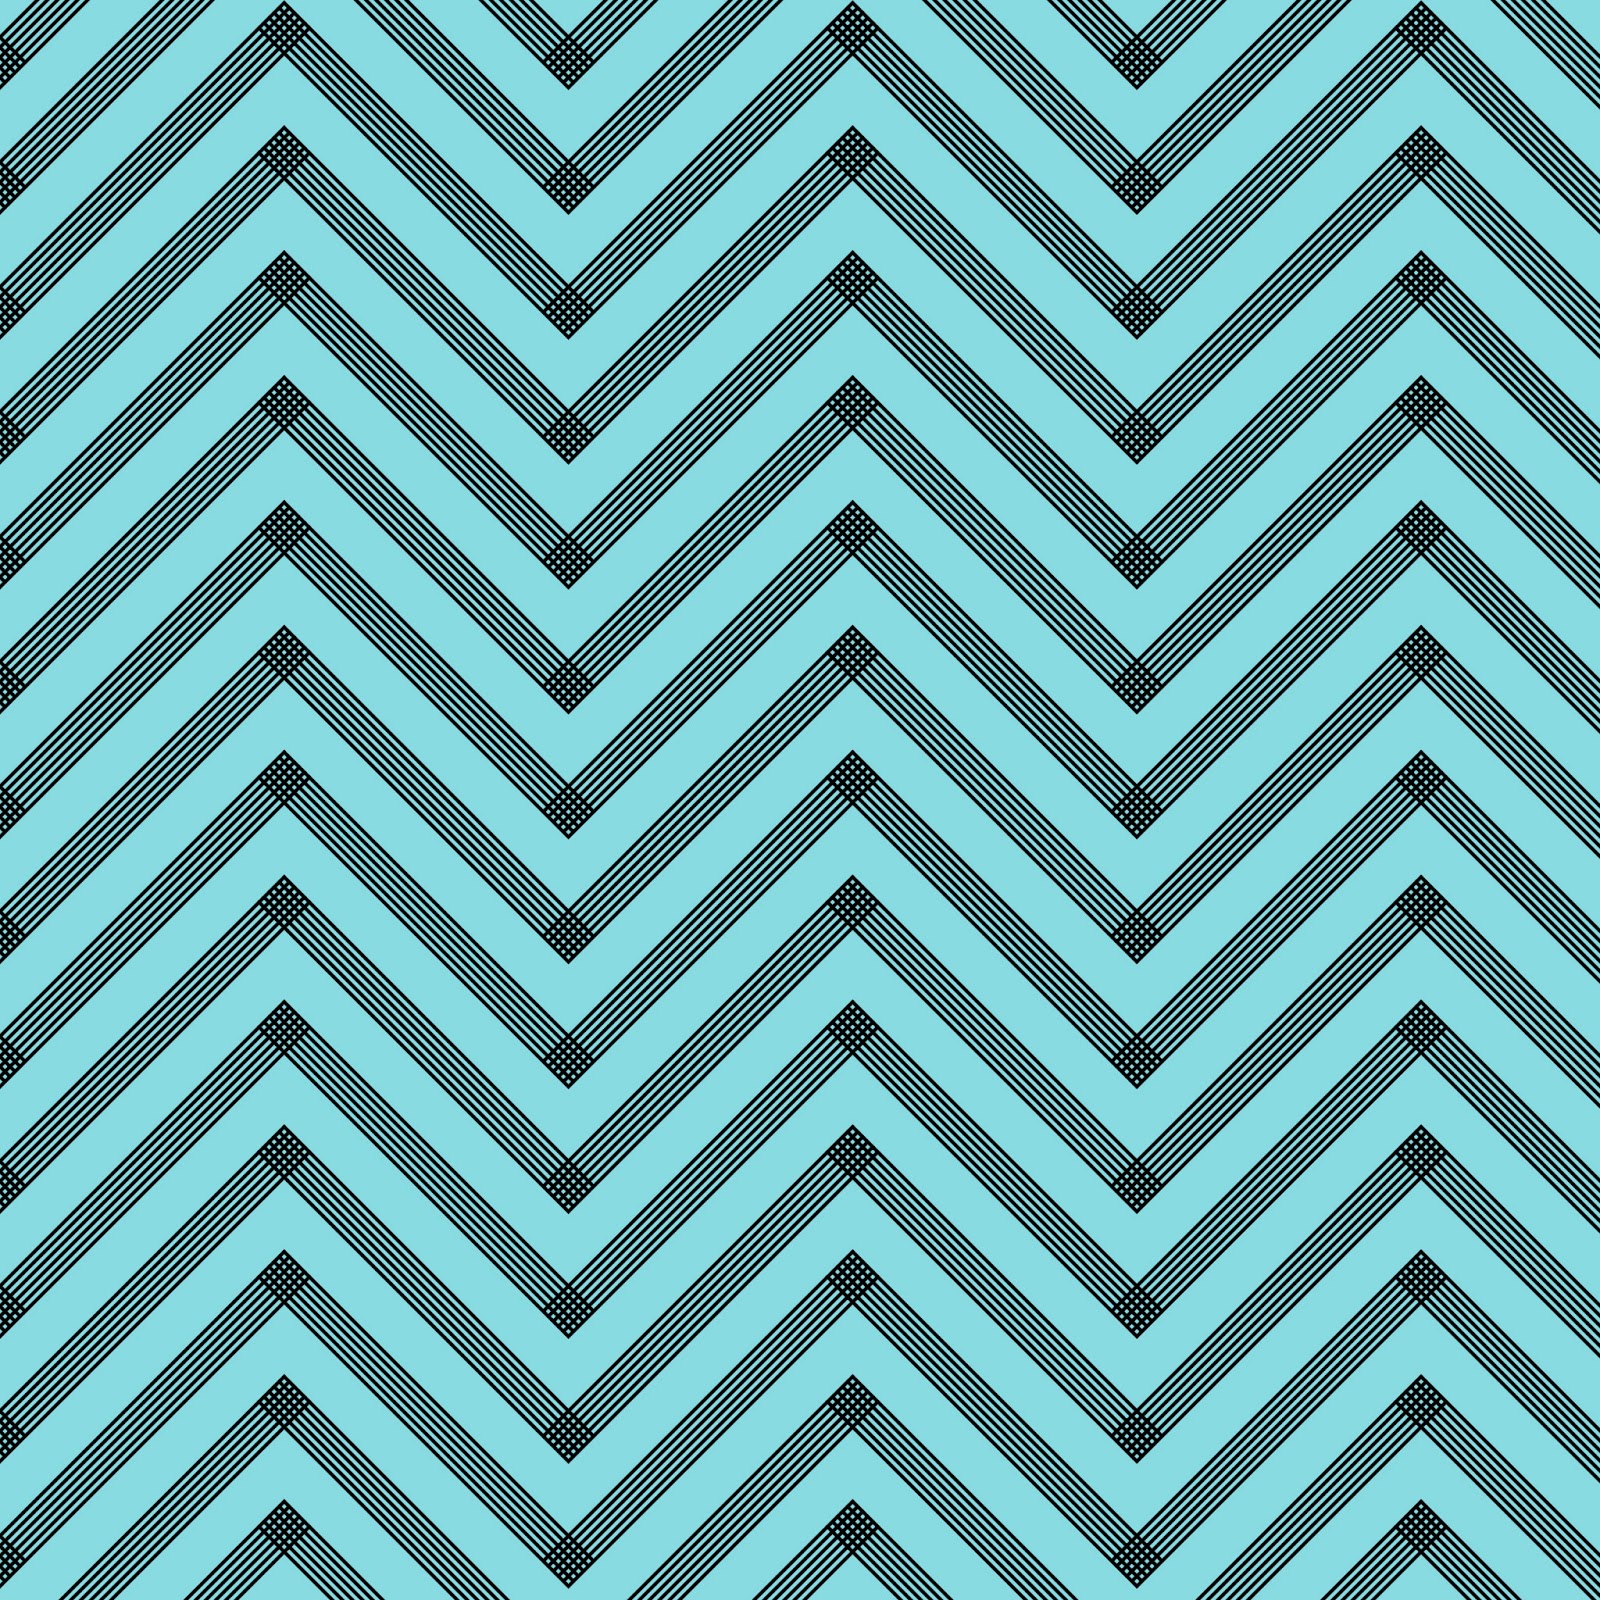 Gallery images and information Chevron Wallpaper